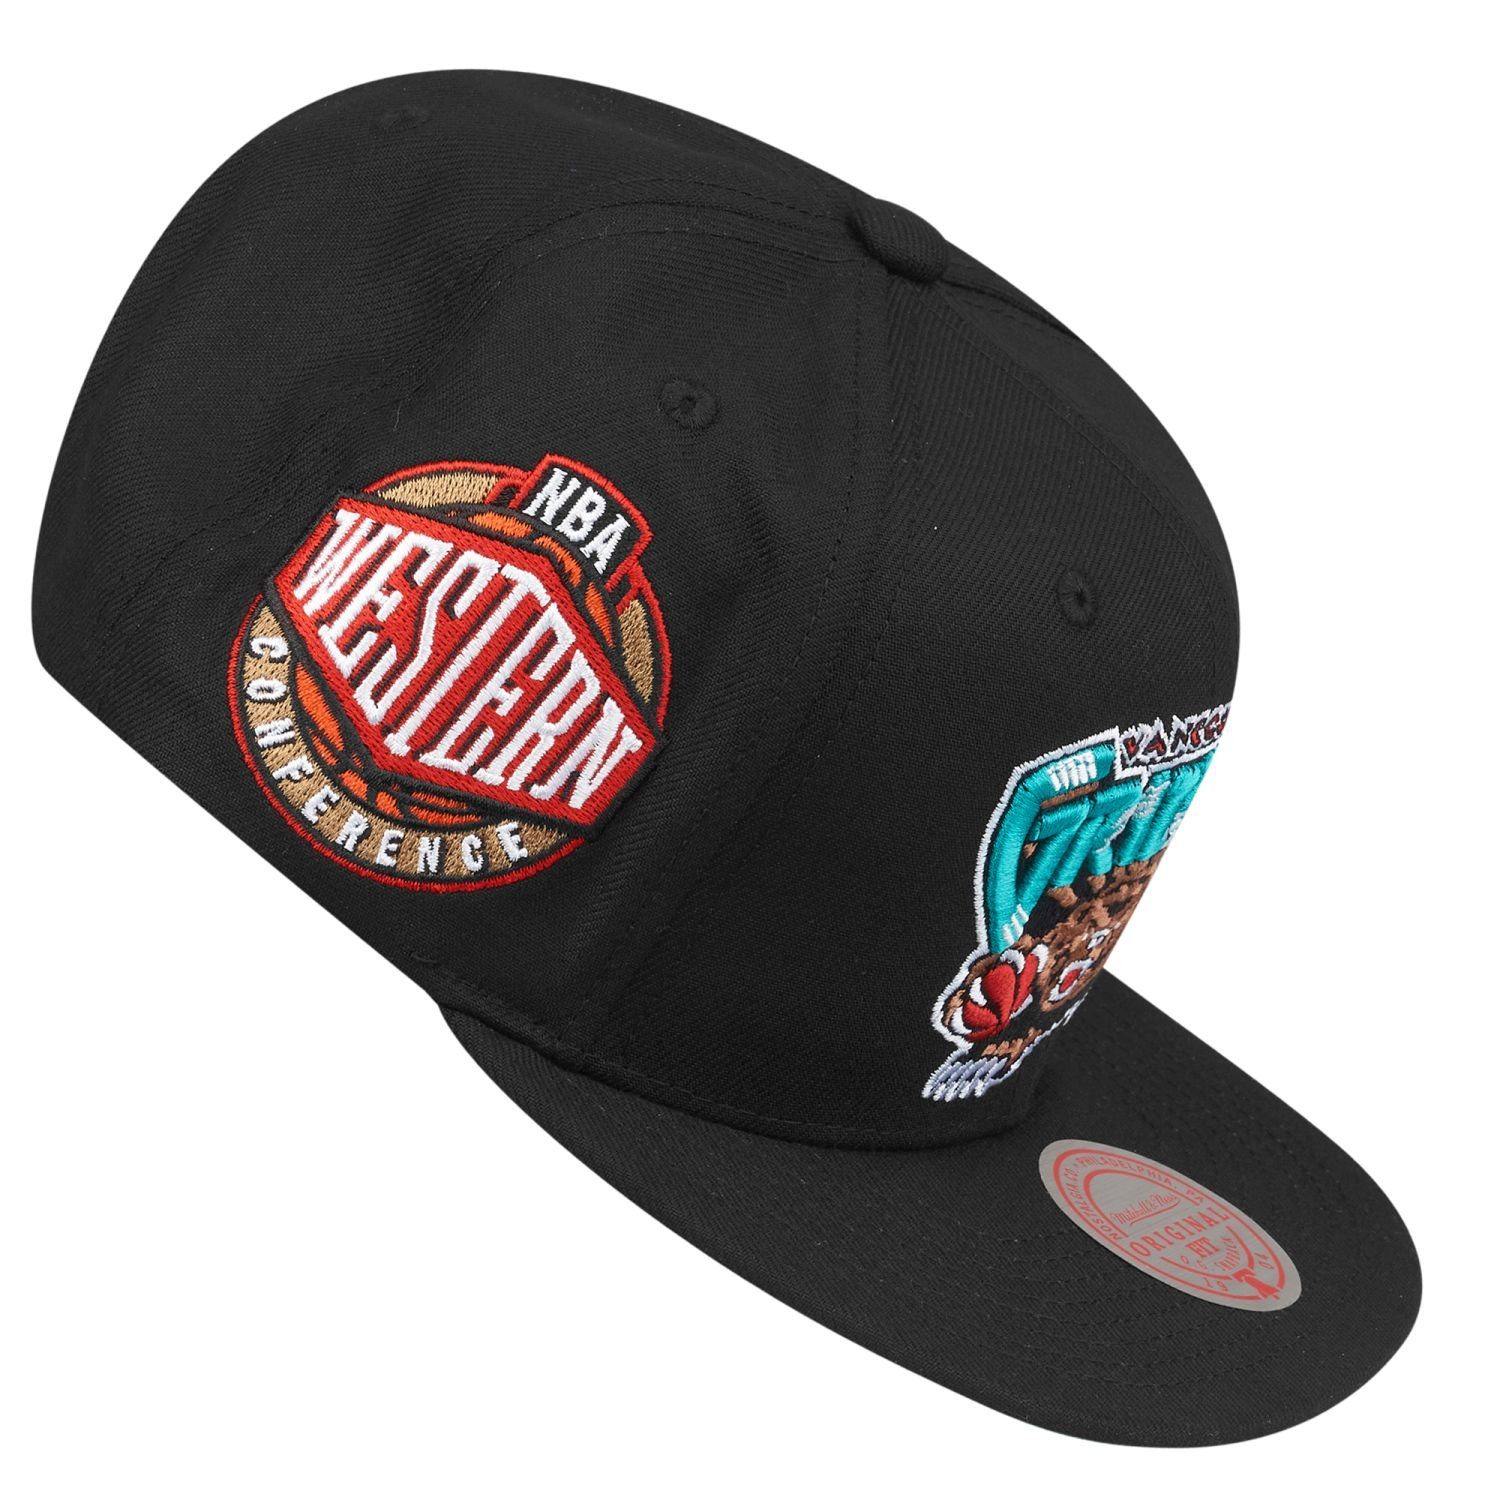 Mitchell Vancouver Ness Grizzlies Snapback & SIDEPATCH Cap